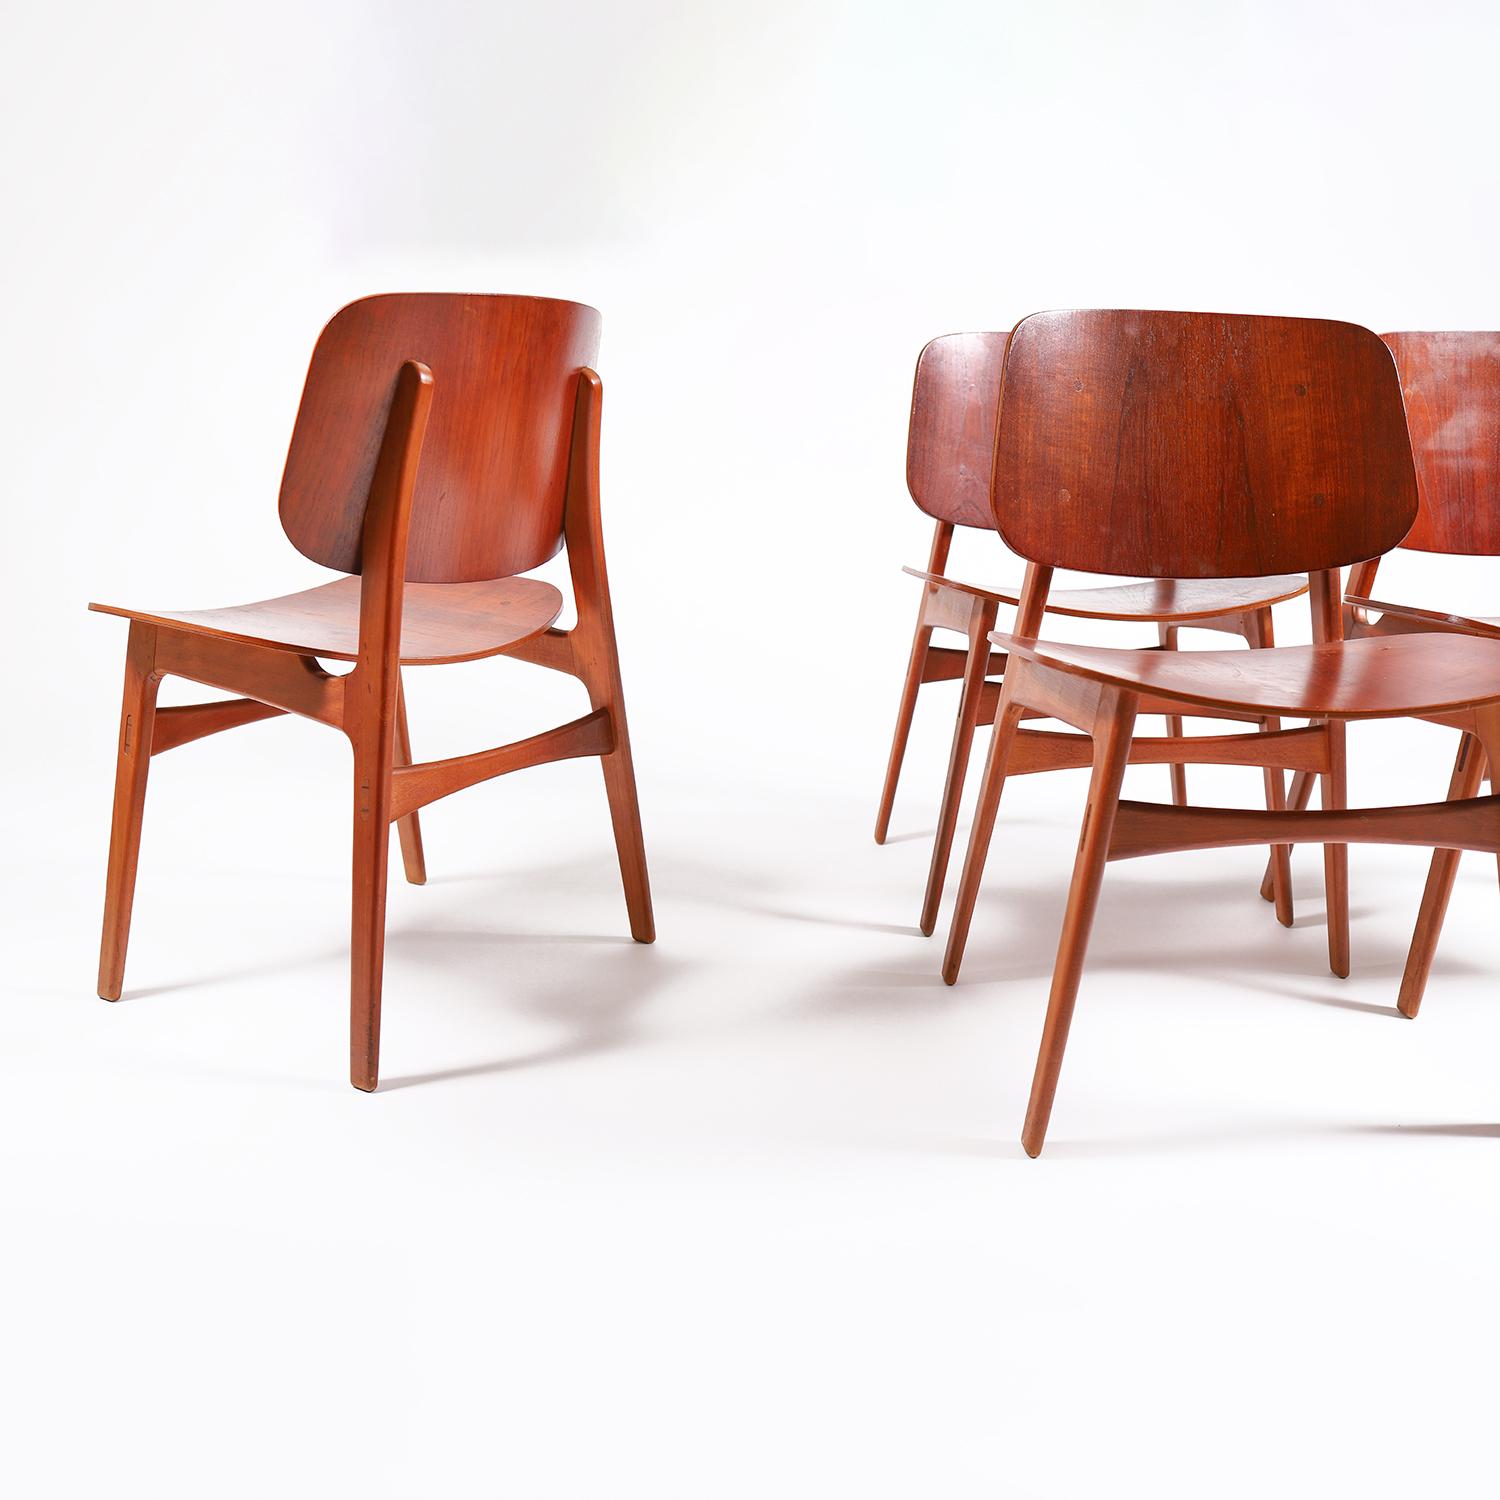 A set of four sculptural teak and beech dining chairs, designed by Borge Mogensen, for Soberg Mobler (model 155). Beechwood frame with teak seat and backrest. 

Professional, skilled furniture restoration is an integral part of what we do every